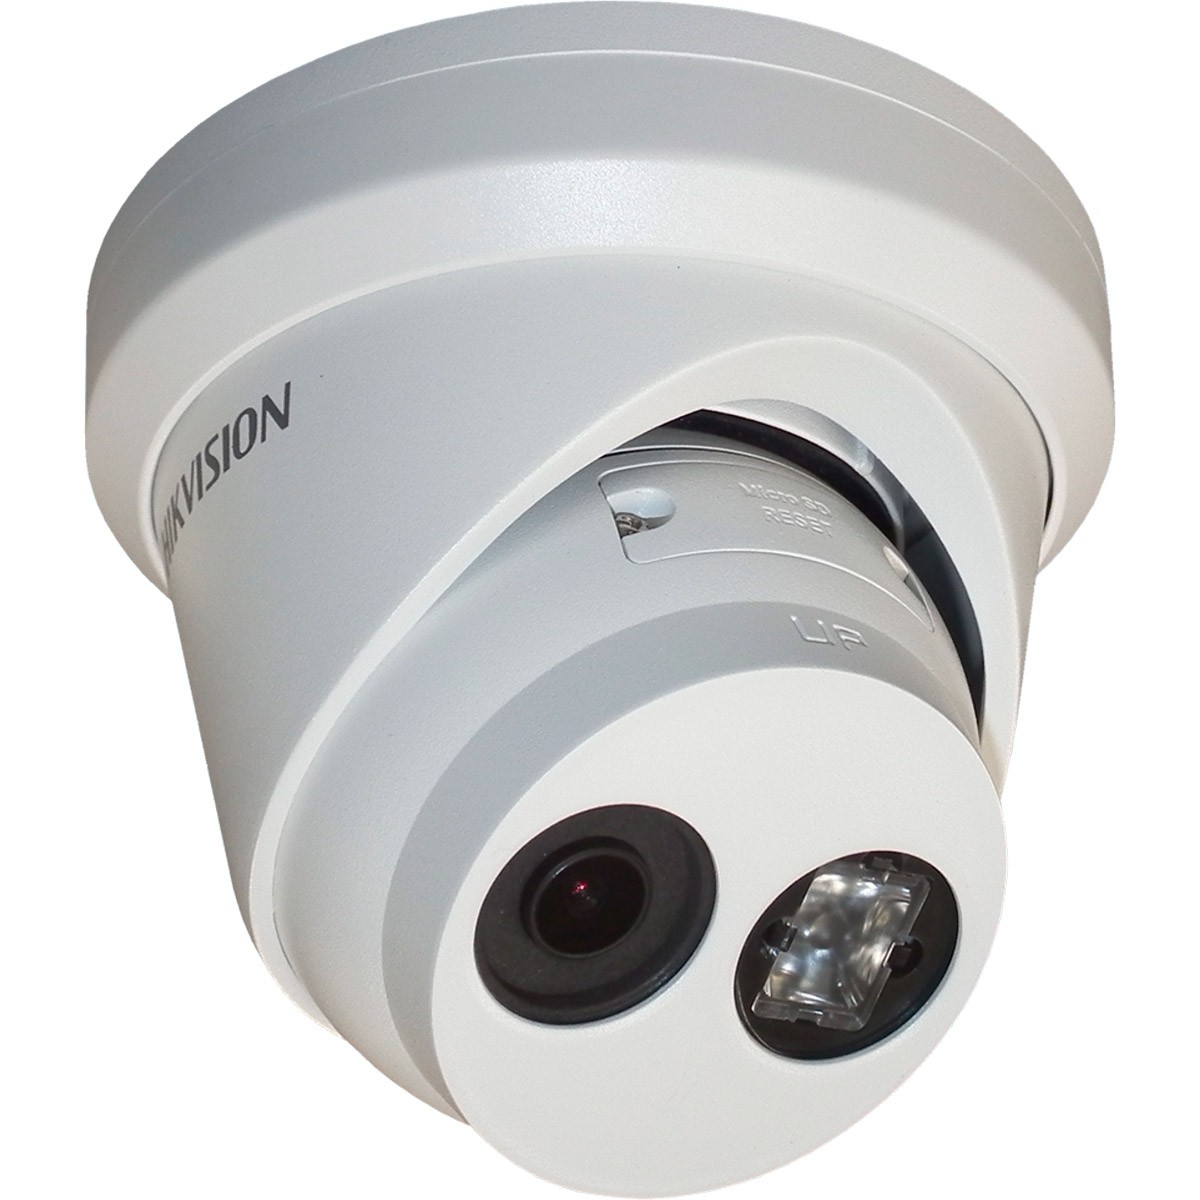 IP-камера Hikvision DS-2CD2345FWD-I (2.8) 98_98.jpg - фото 2